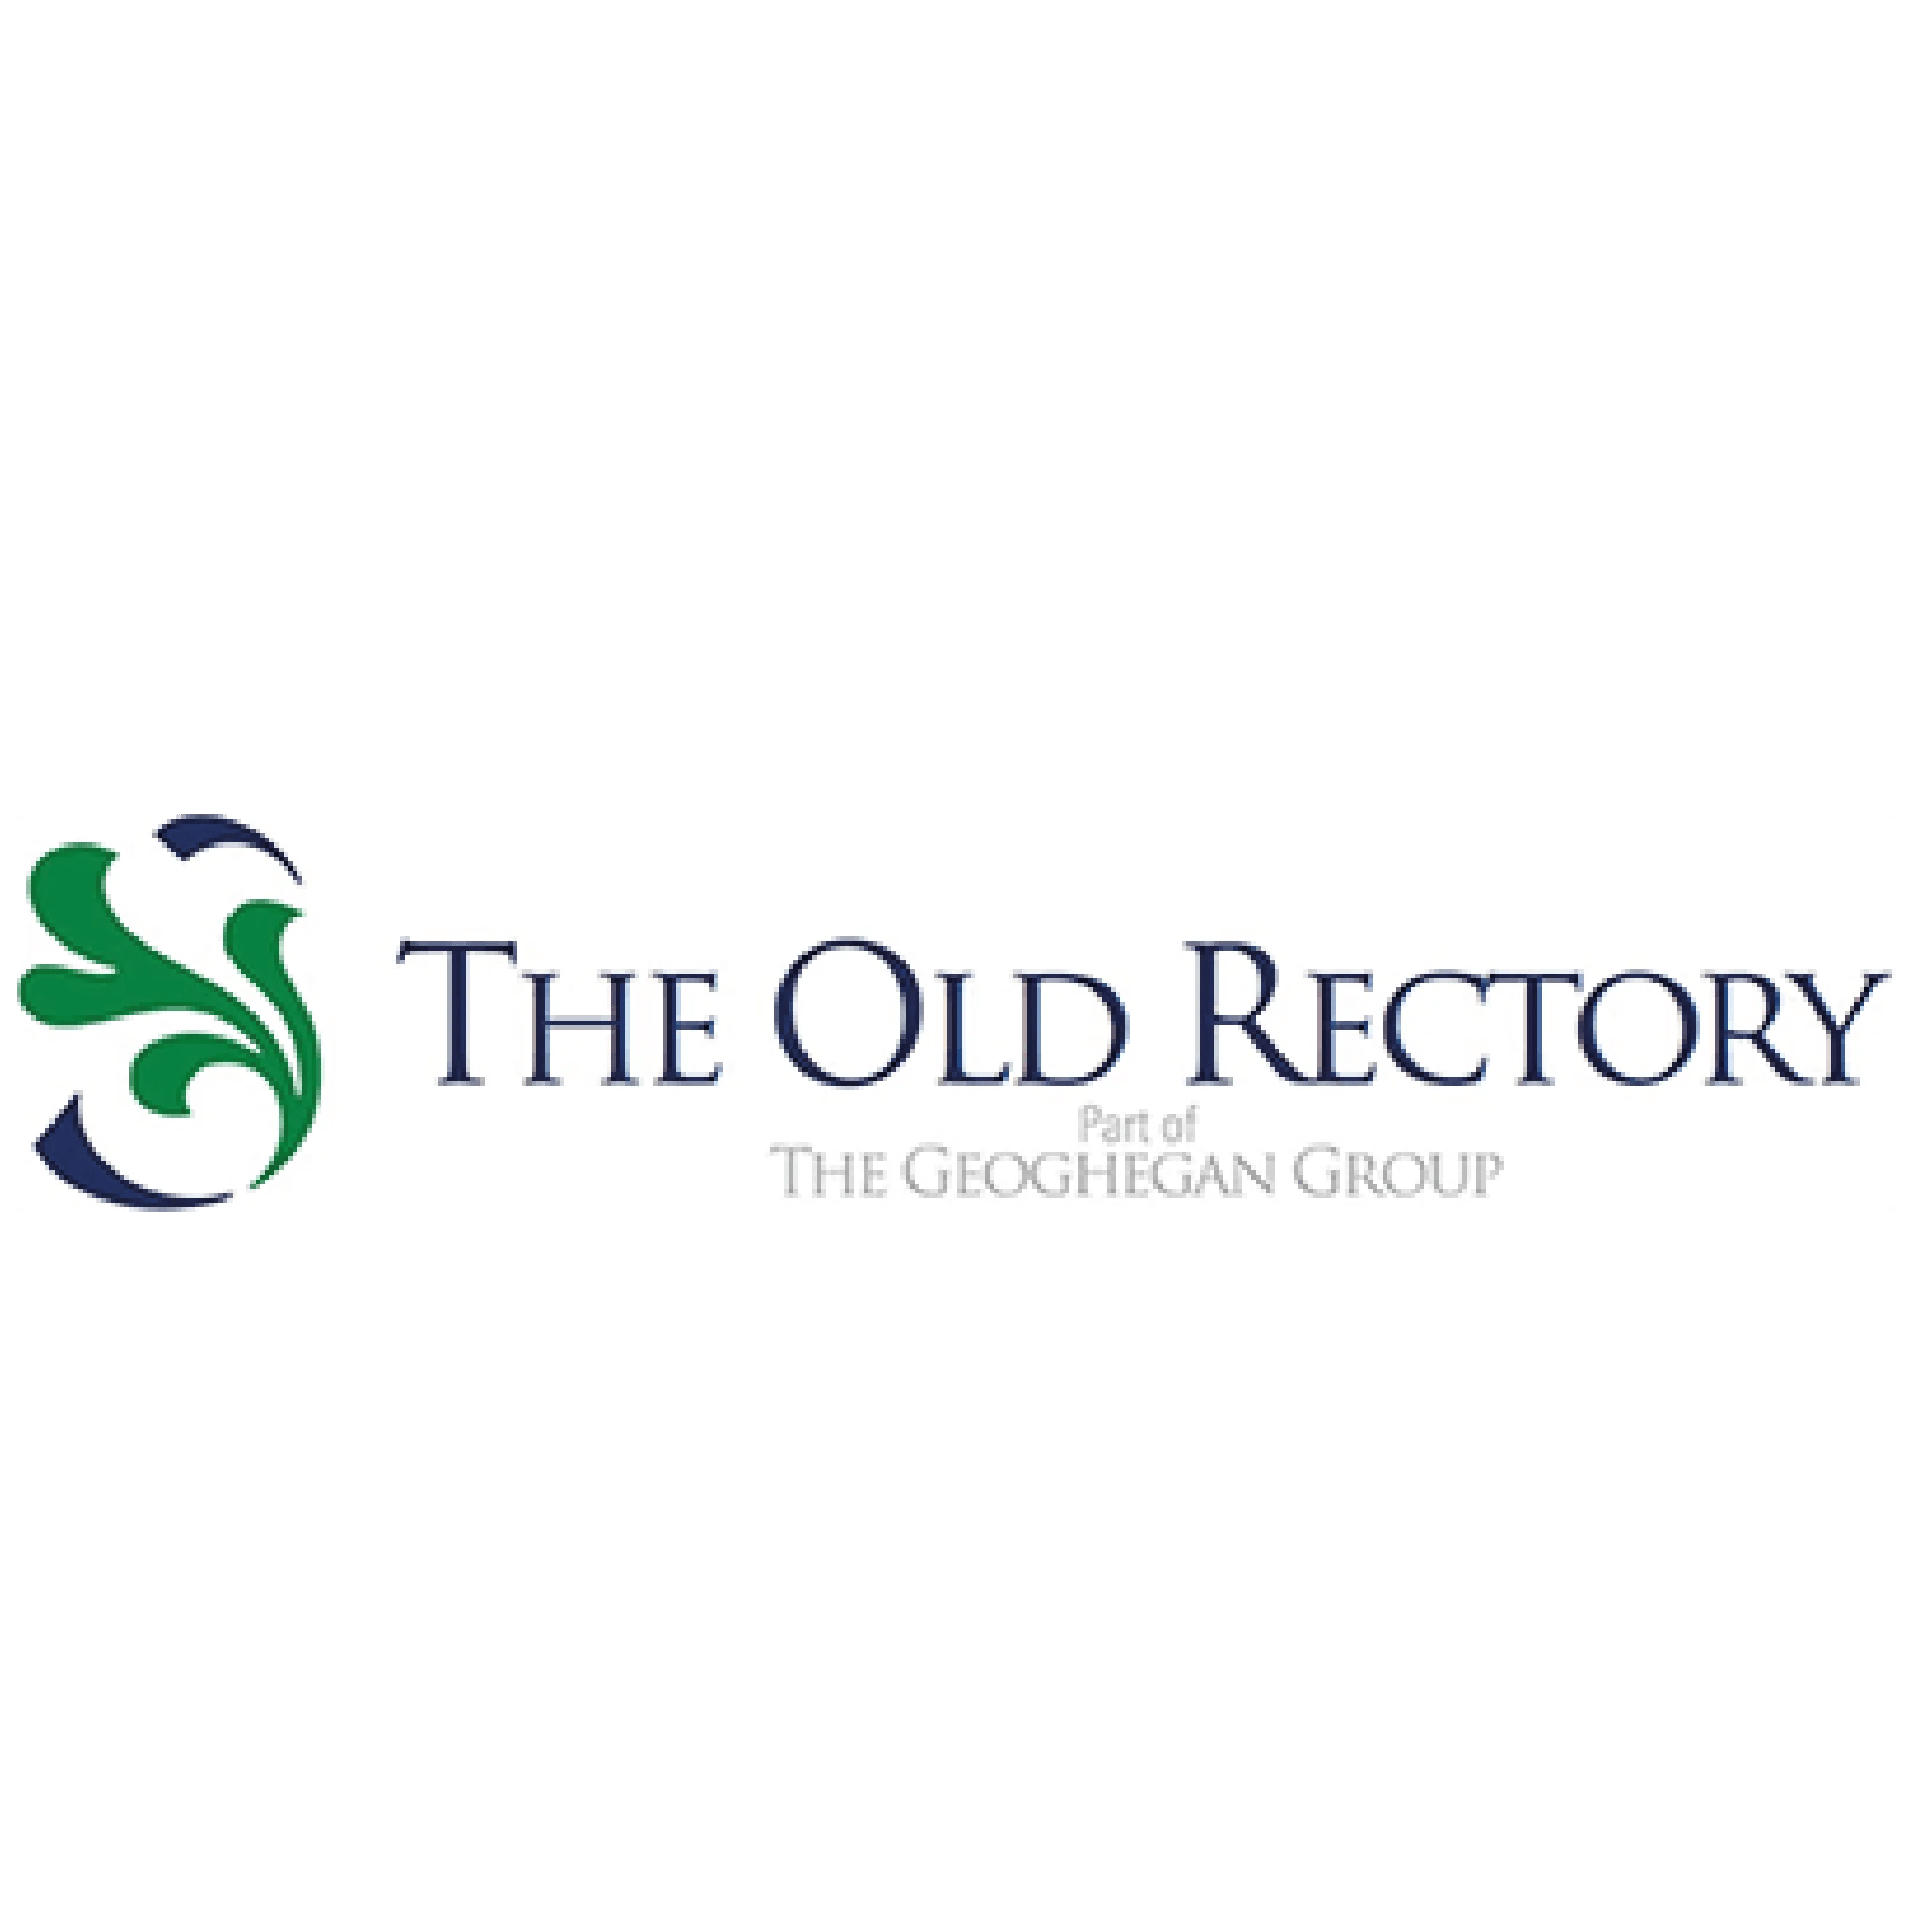 The old rectory logo